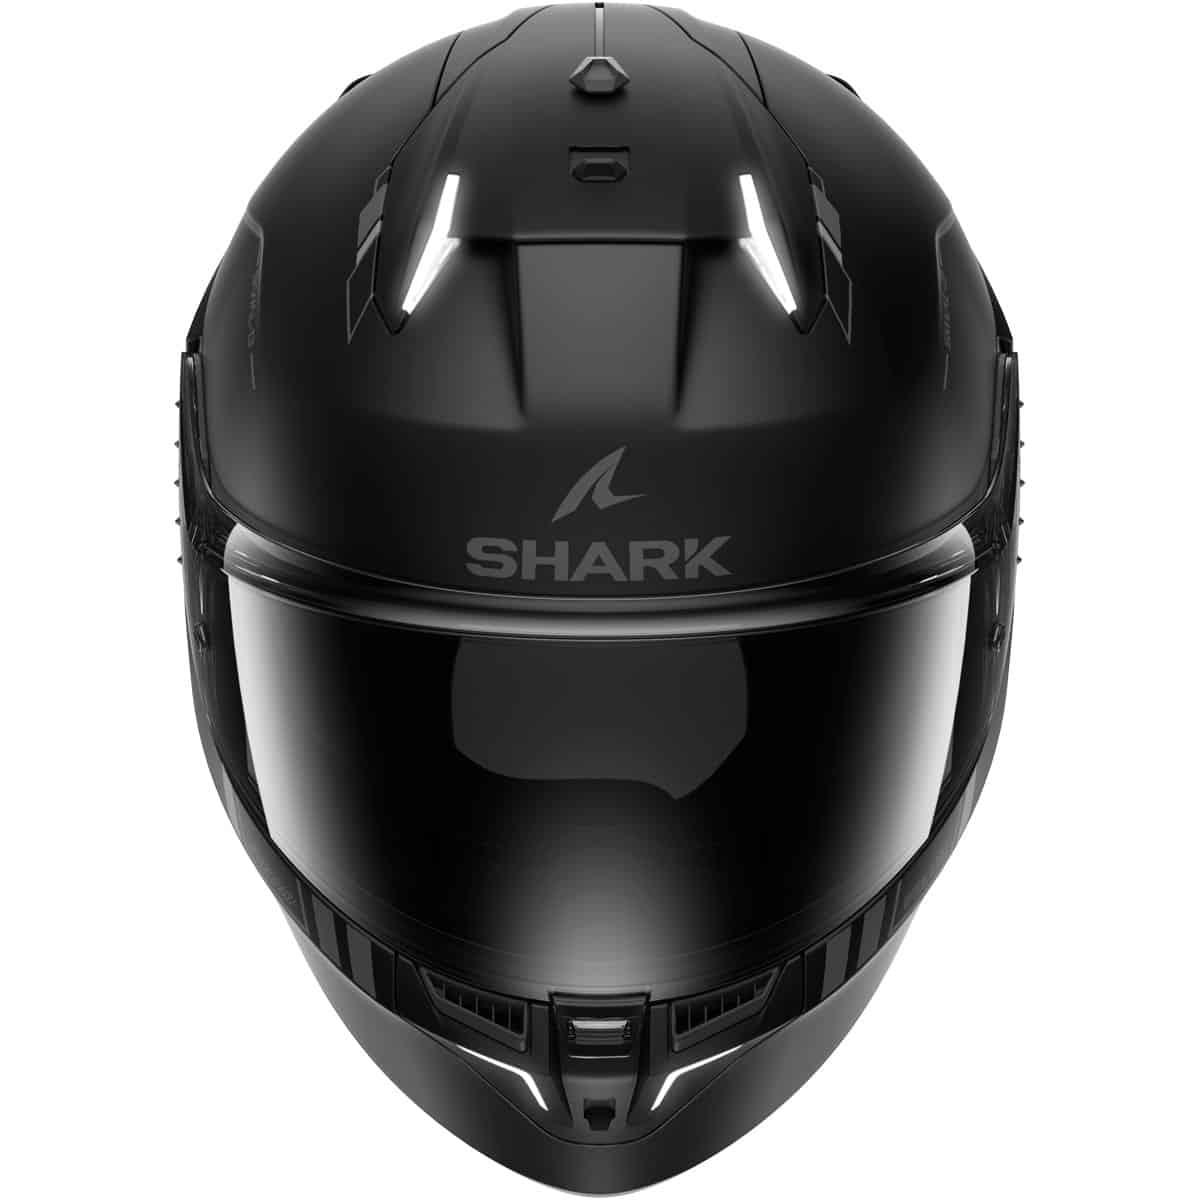 The Shark Skwal i3 helmet is the world's 1st helmet with integrated brake lights. This revolutionary full face helmet from Shark is a true marvel of modern engineering, merging the essential requirements of the ECE 22-06 certification with an eye-catching, motorsport-inspired design and cutting-edge LED lighting.  2